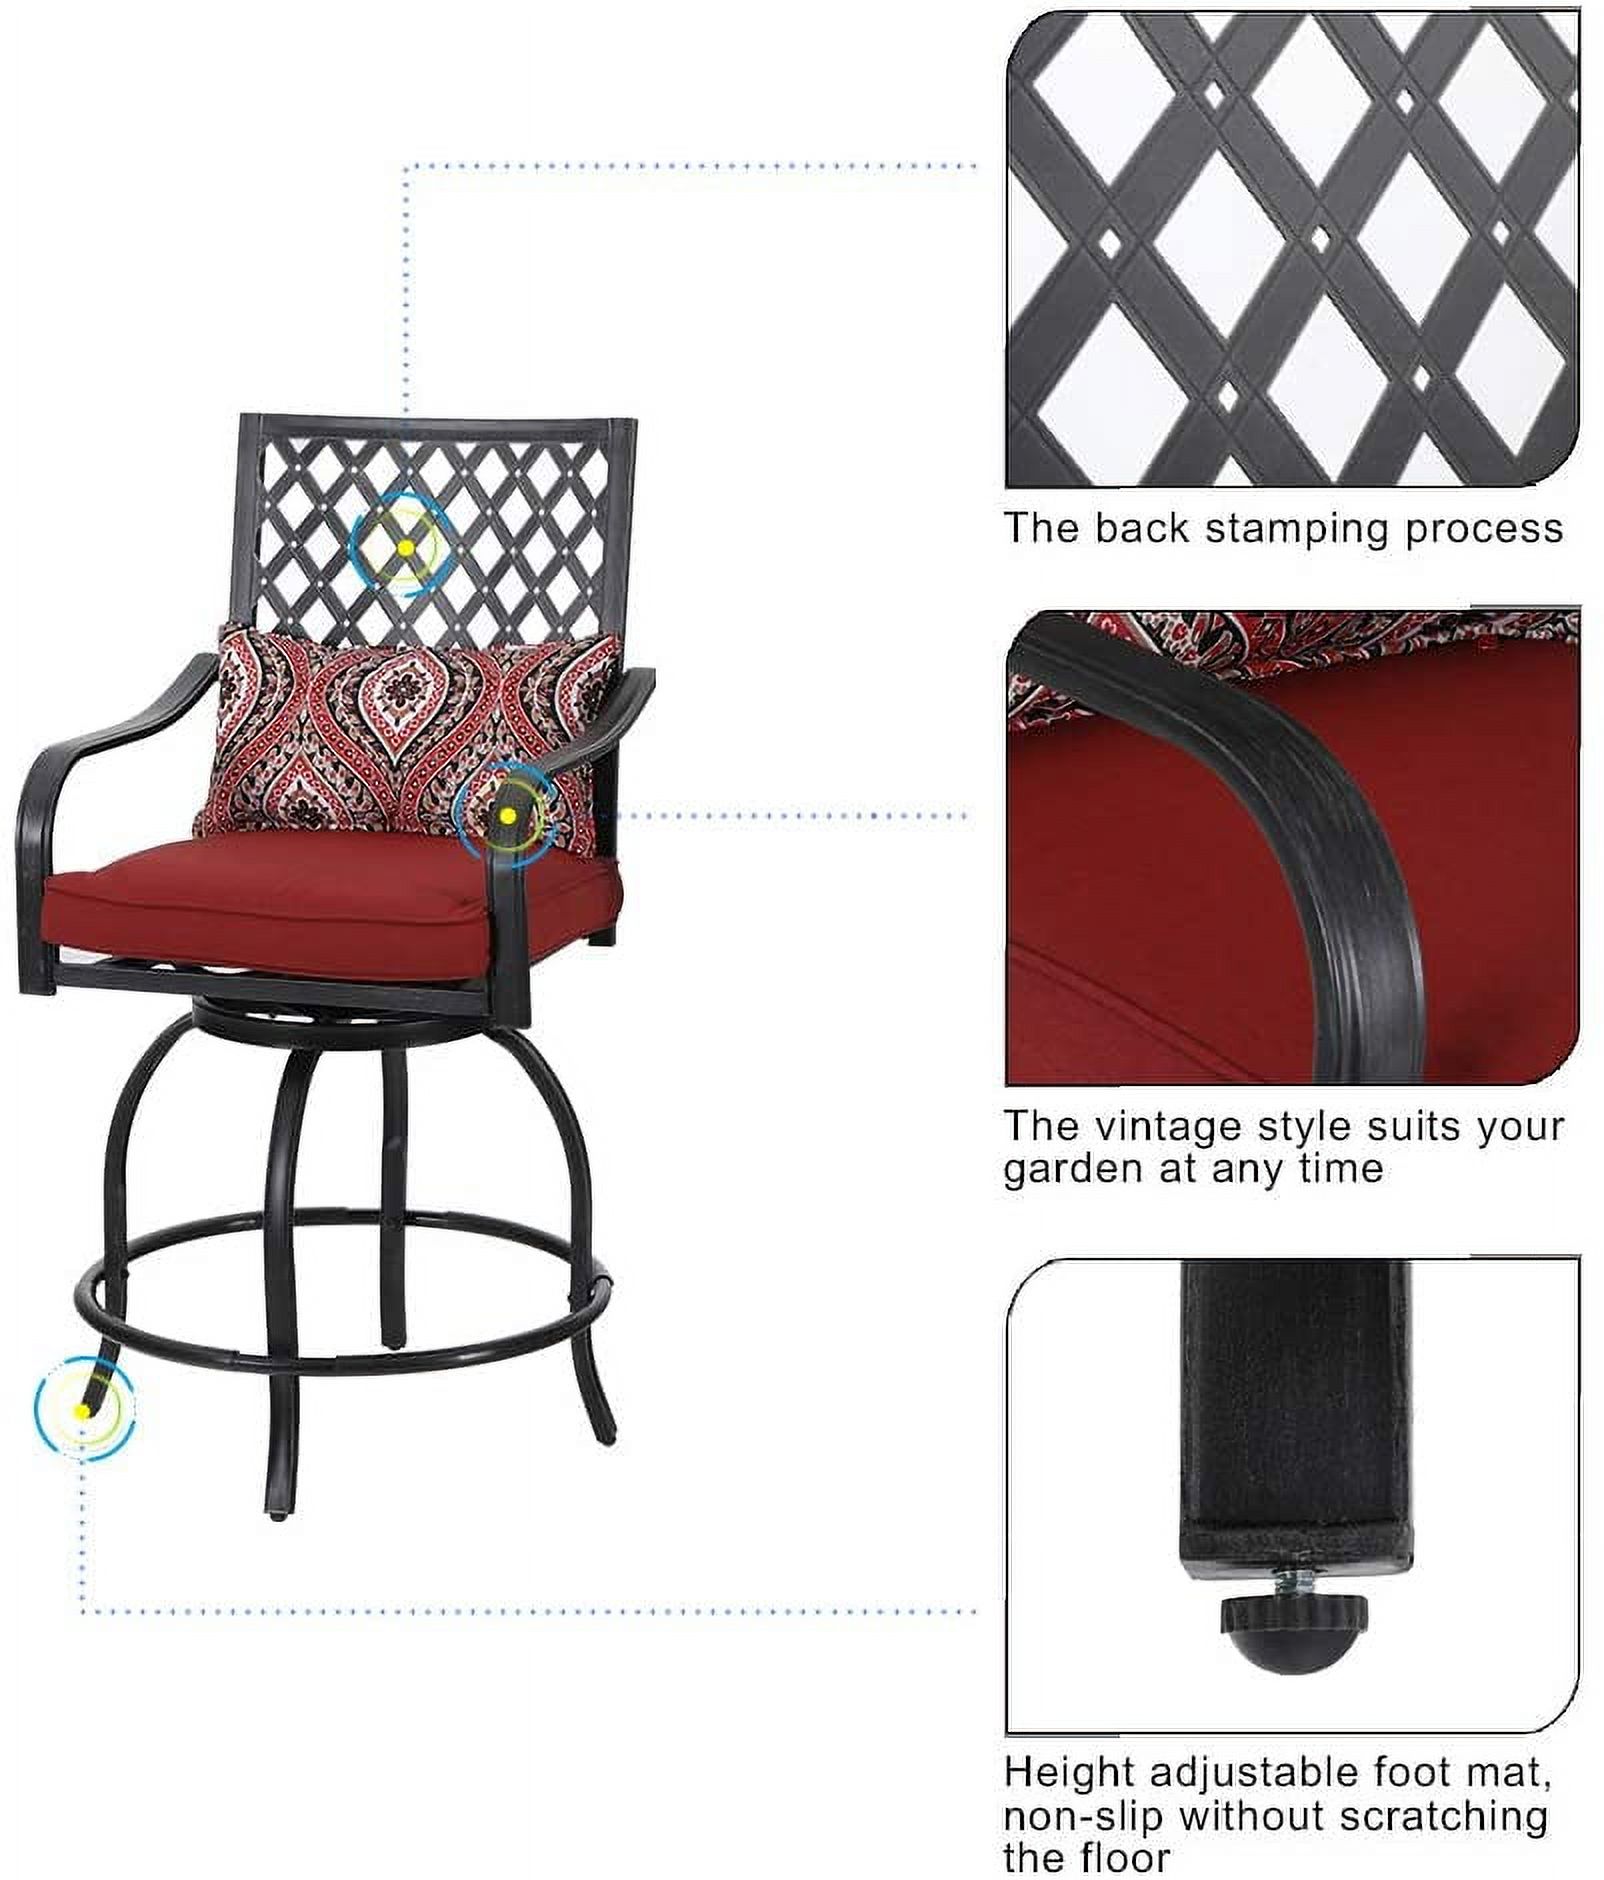 MF Studio 4-Piece Patio Dining Chairs Outdoor Swivel Bar Stools Extra Wide Height Modern Patio Furniture Suitable for Patio Garden Porch Dining Room with Red Cushion - image 3 of 6